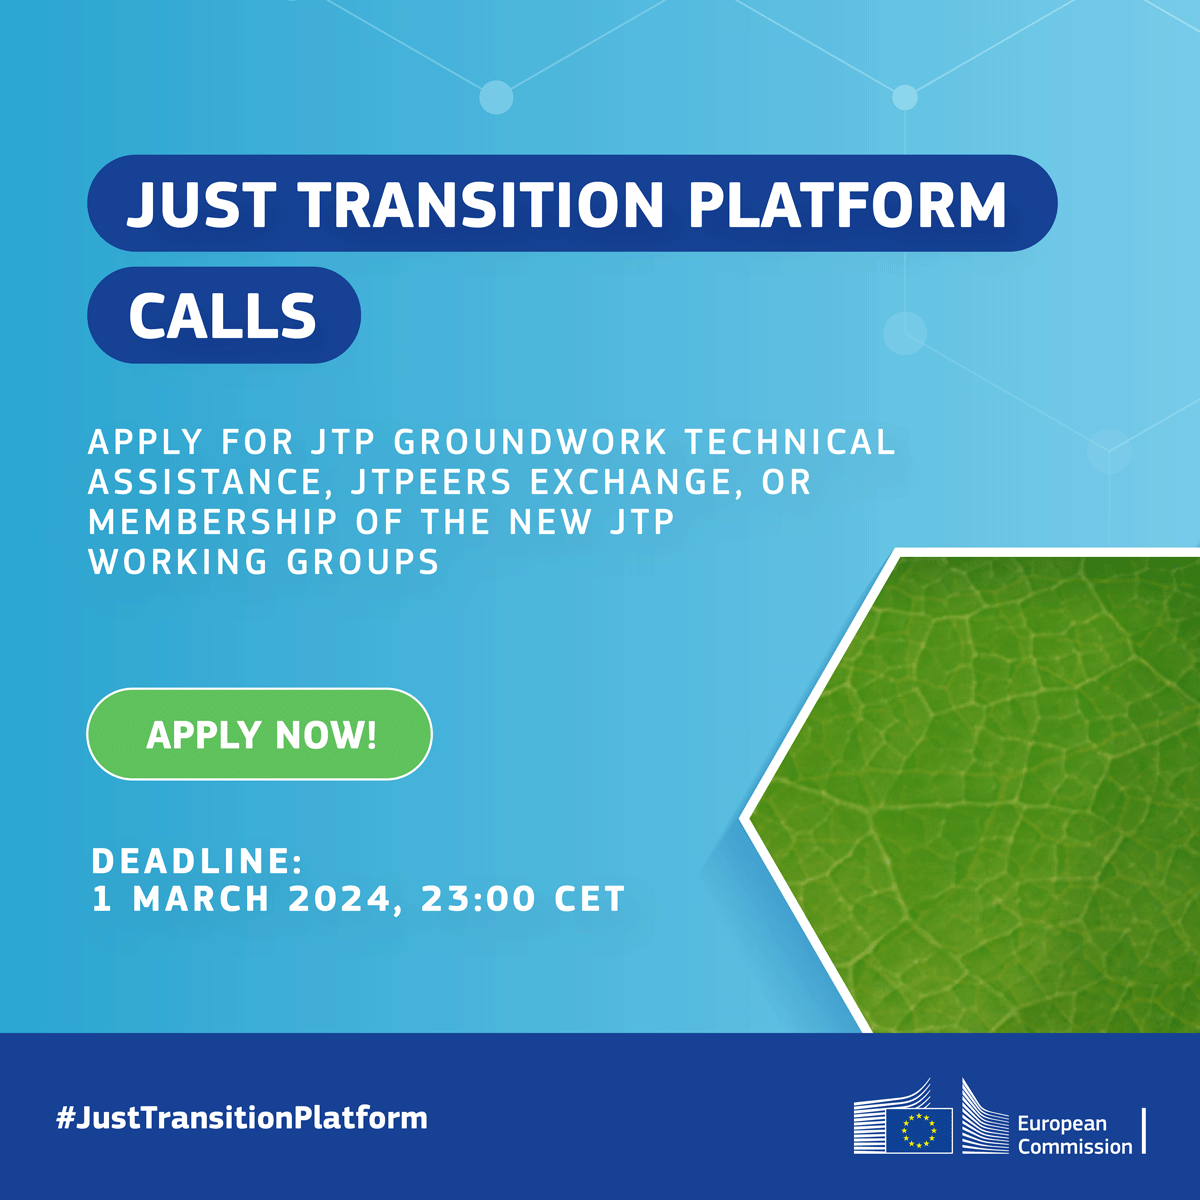 Apply now! Three new calls for support services under the Just Transition Platform